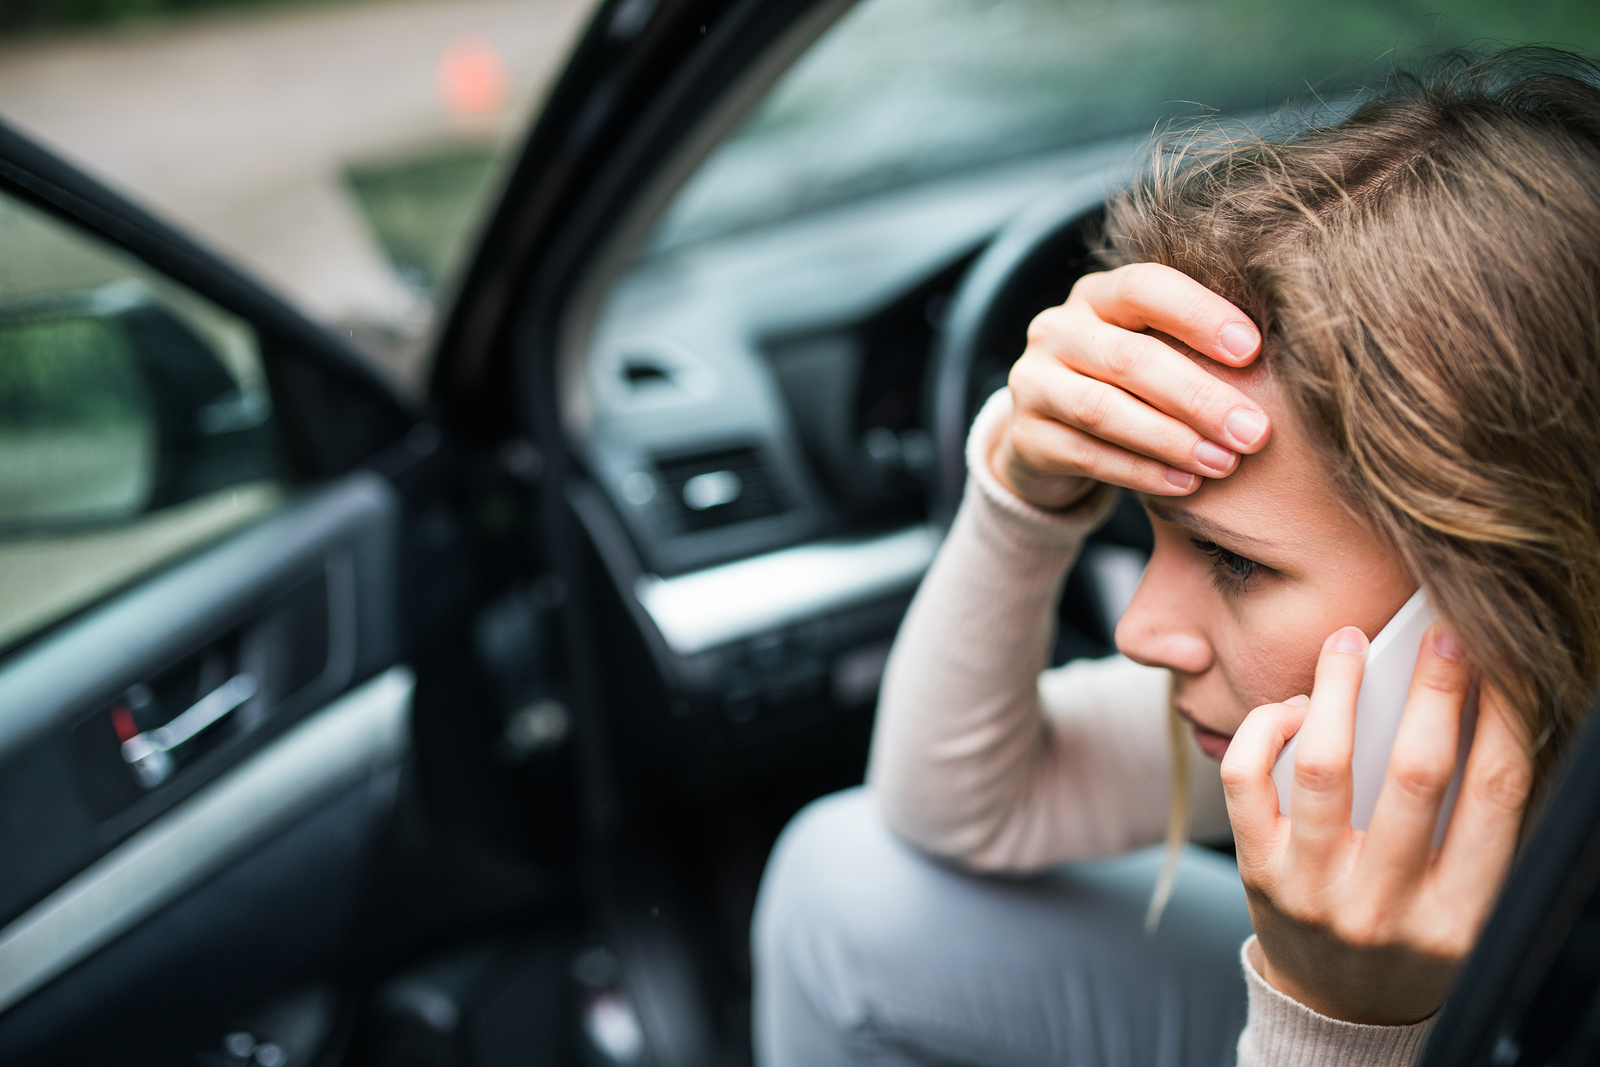 04 05 19 bigstock young woman in the damaged car 258603493